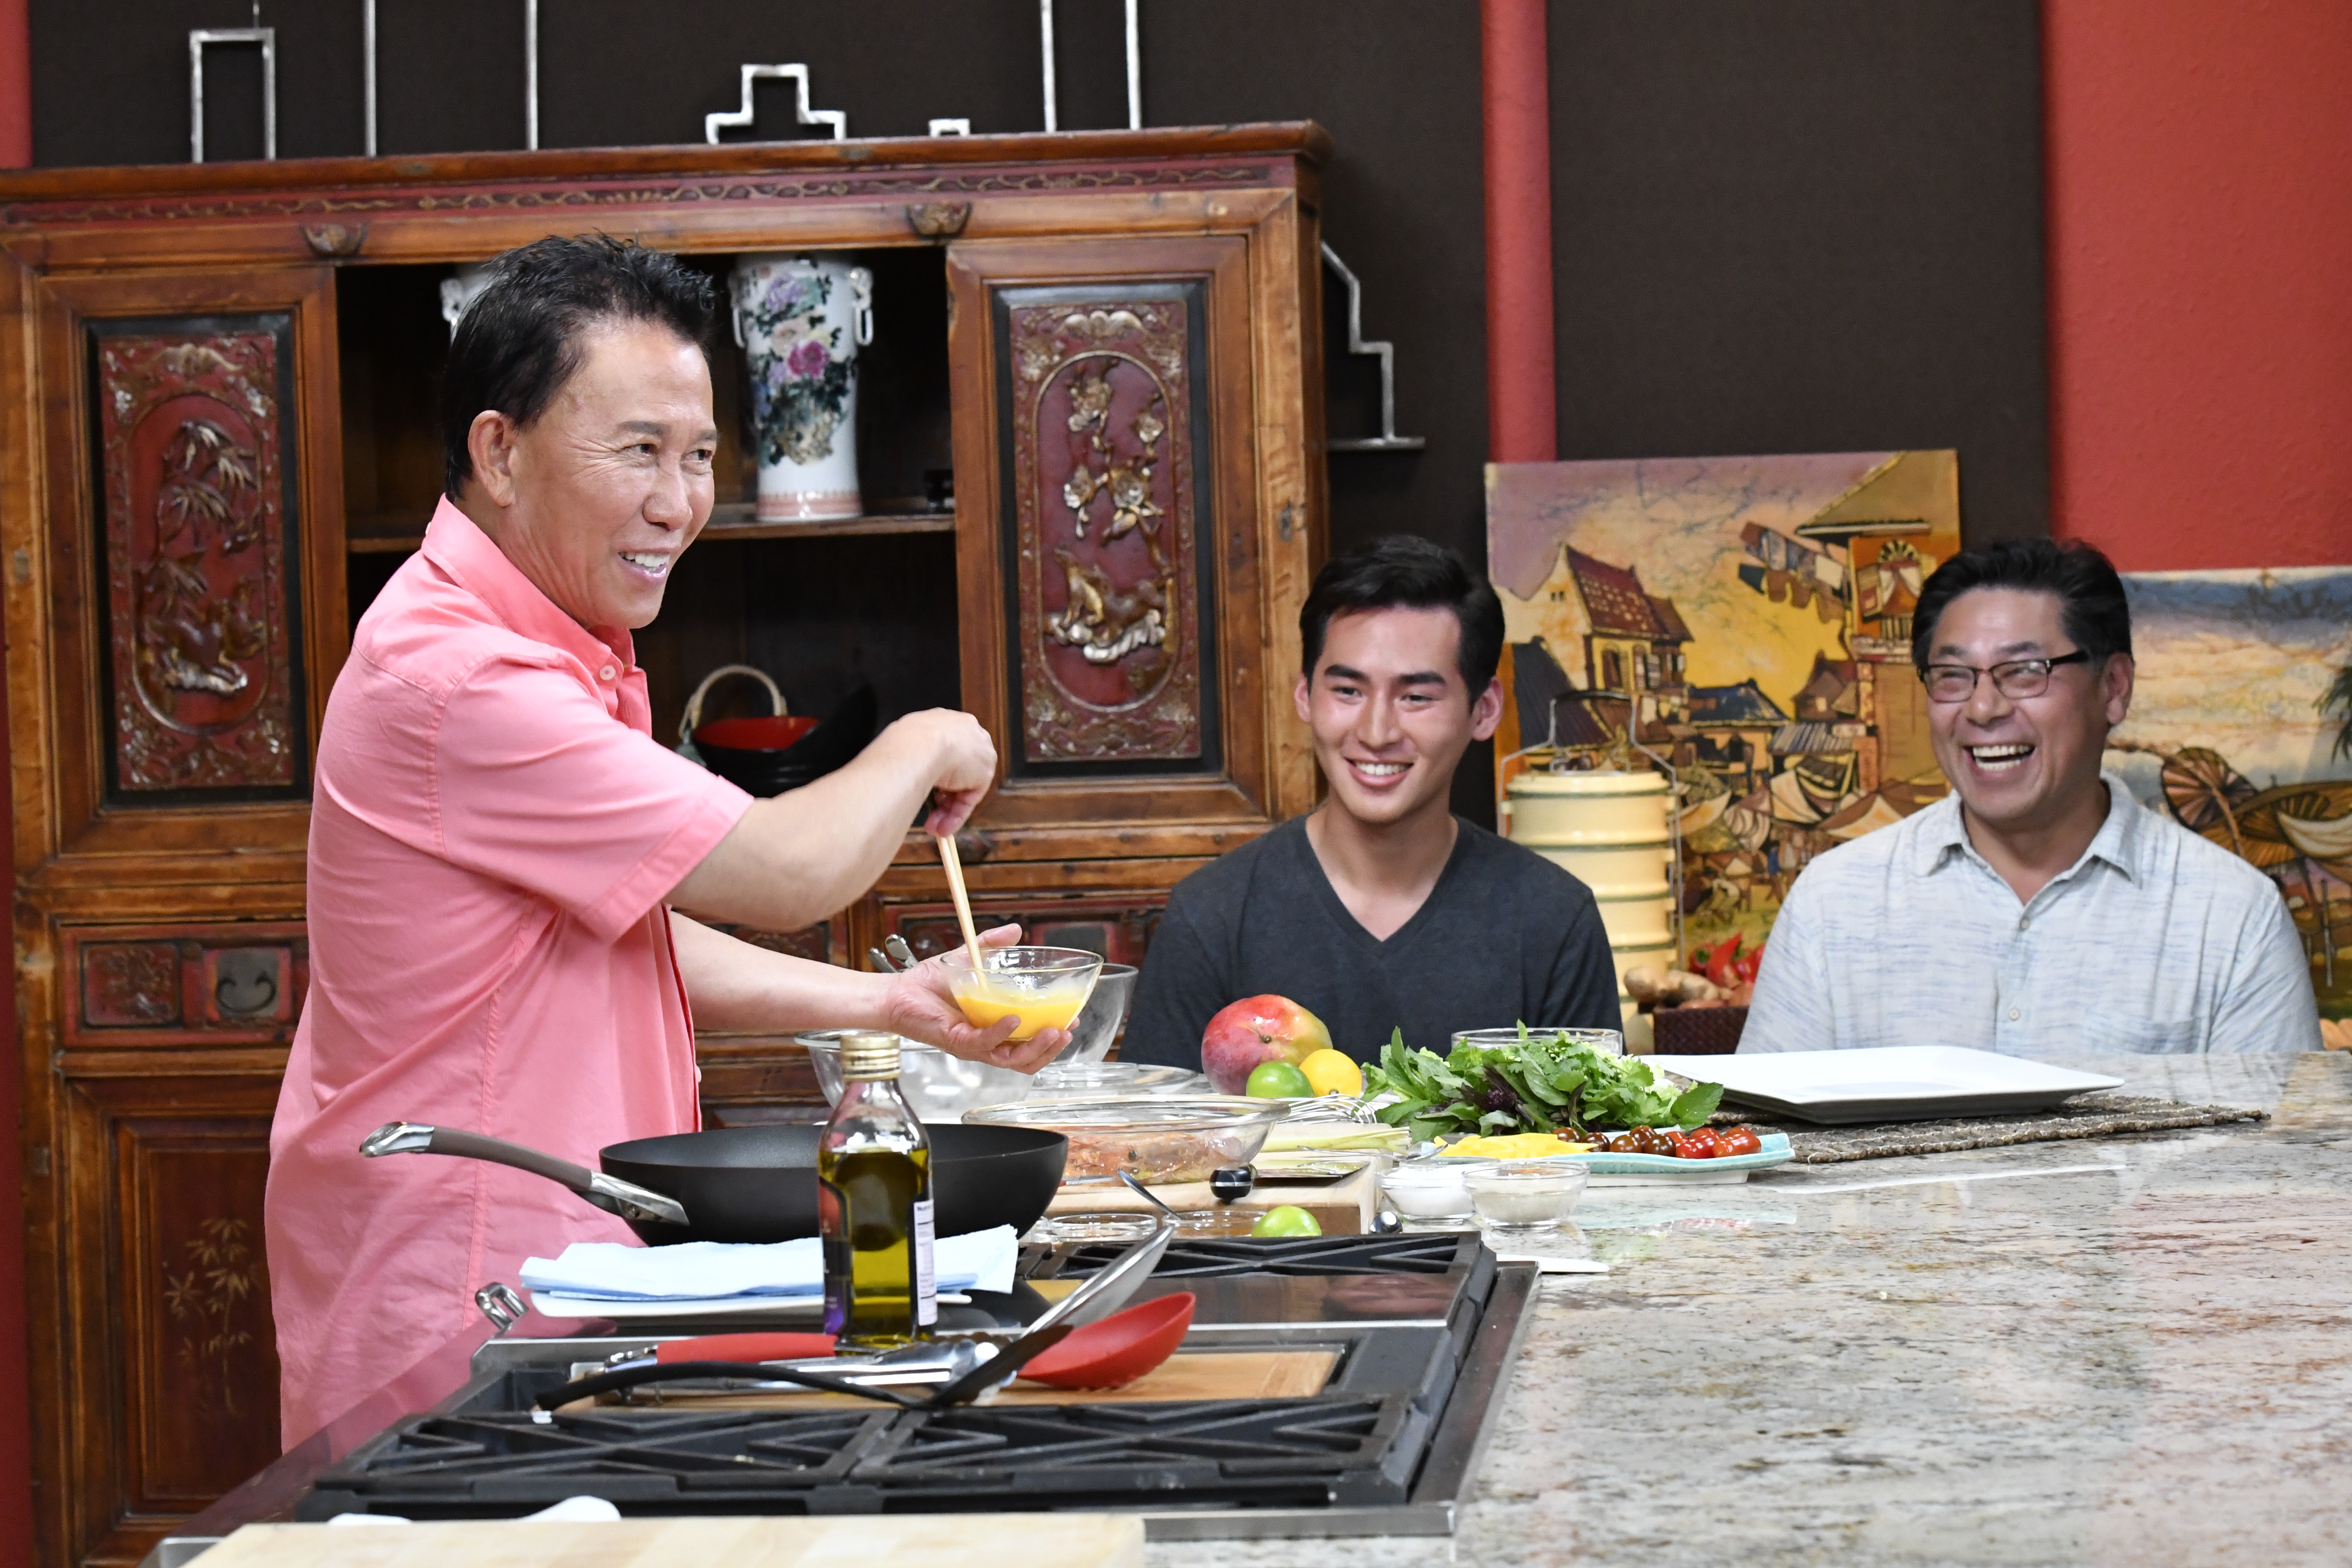 The PBS Chef Martin Yan Teaches Chinese Cooking to a New Audience